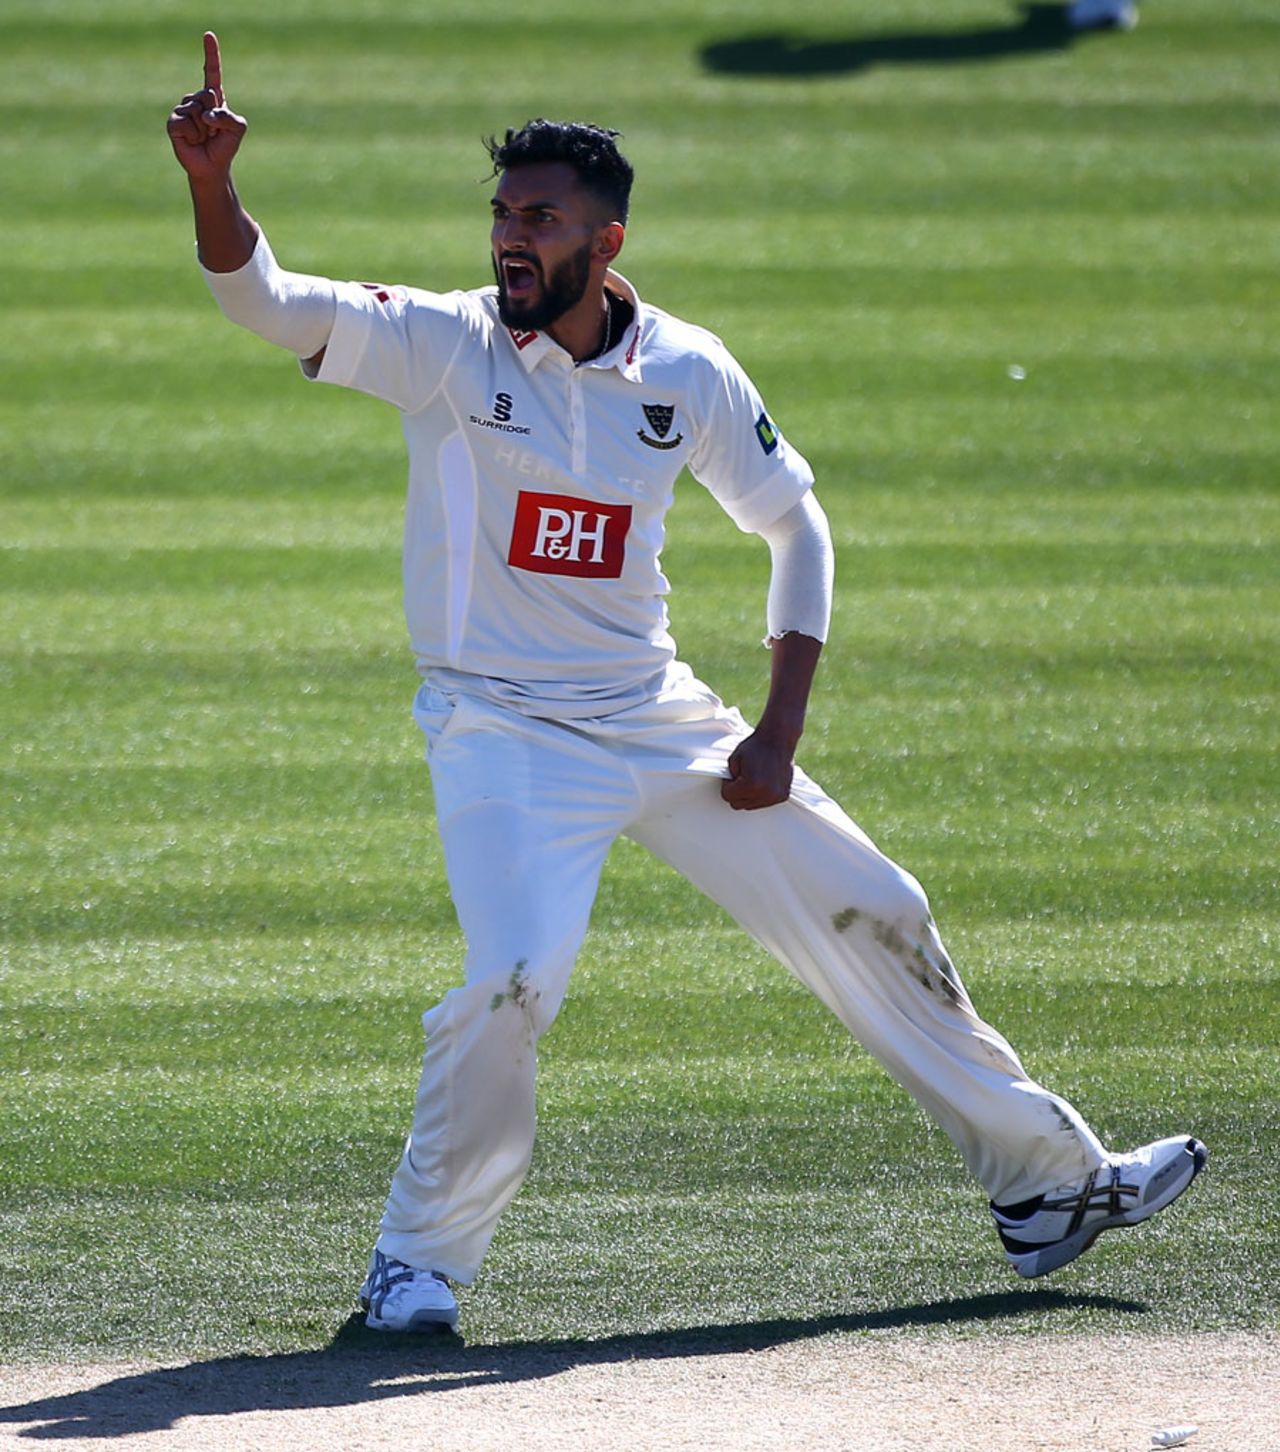 Ajmal Shahzad ran through Worcestershire's top order, Sussex v Worcestershire, County Championship Division One, Hove, 4th day, April 22, 2015